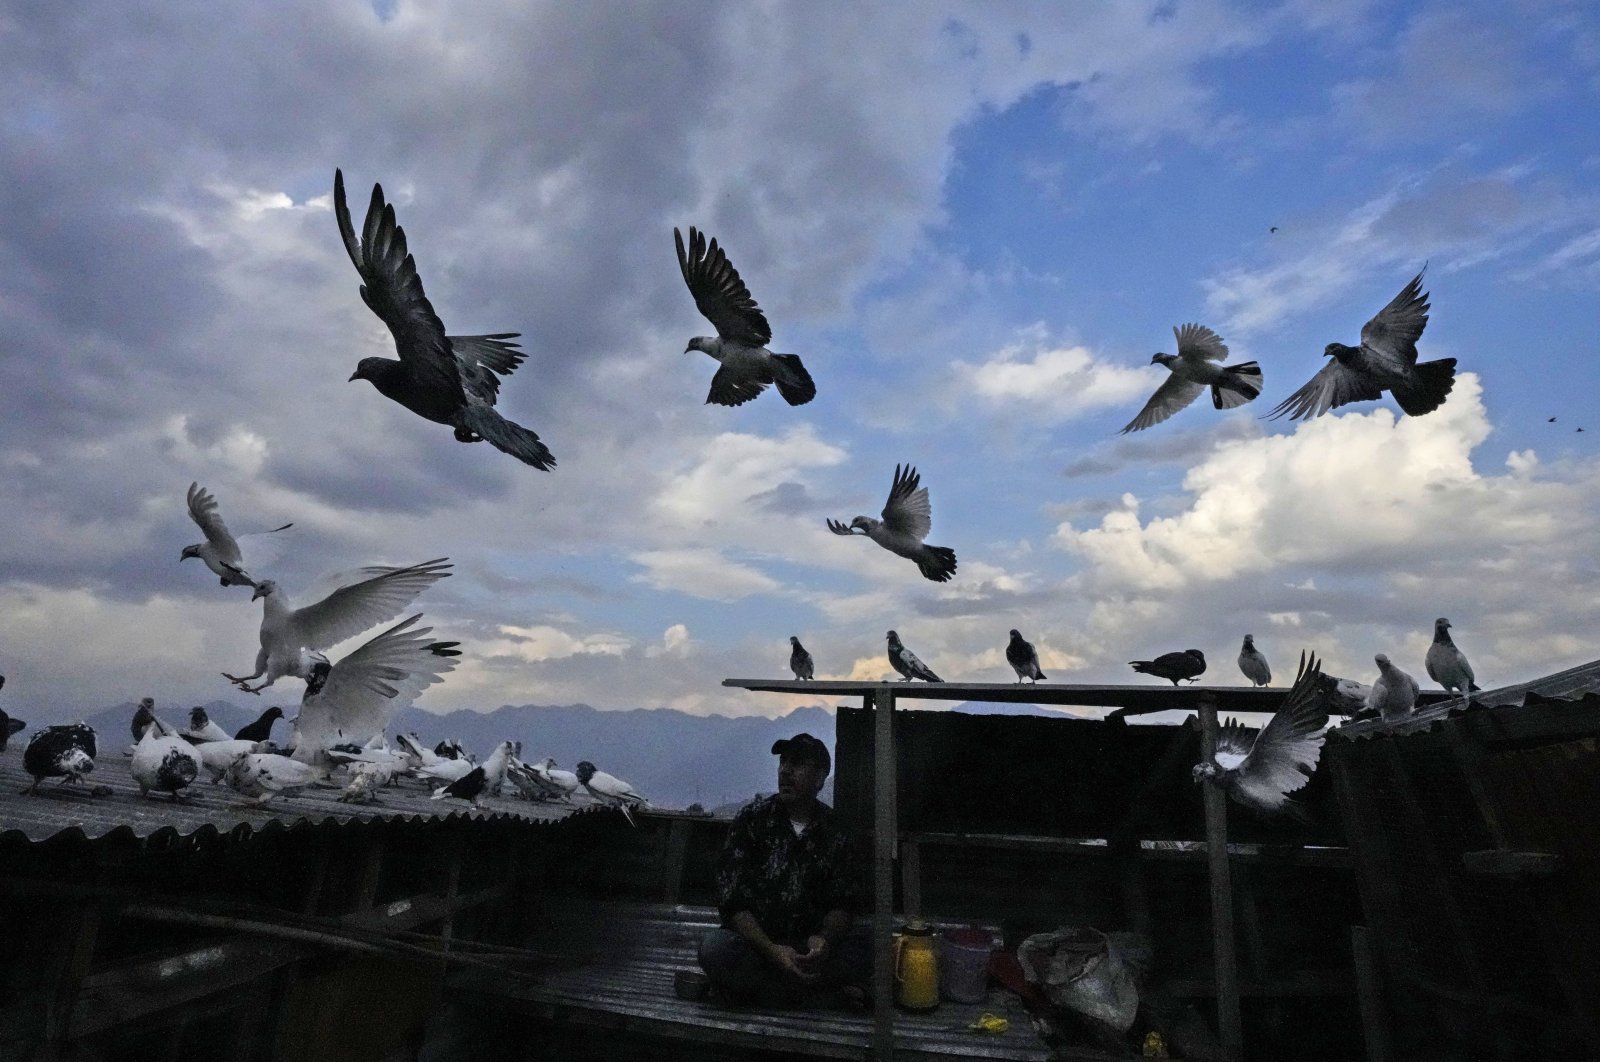 A Kashmiri pigeon handler feeds his pigeons from his rooftop in Srinagar, Indian-occupied Kashmir, June 17, 2022. (AP Photo)